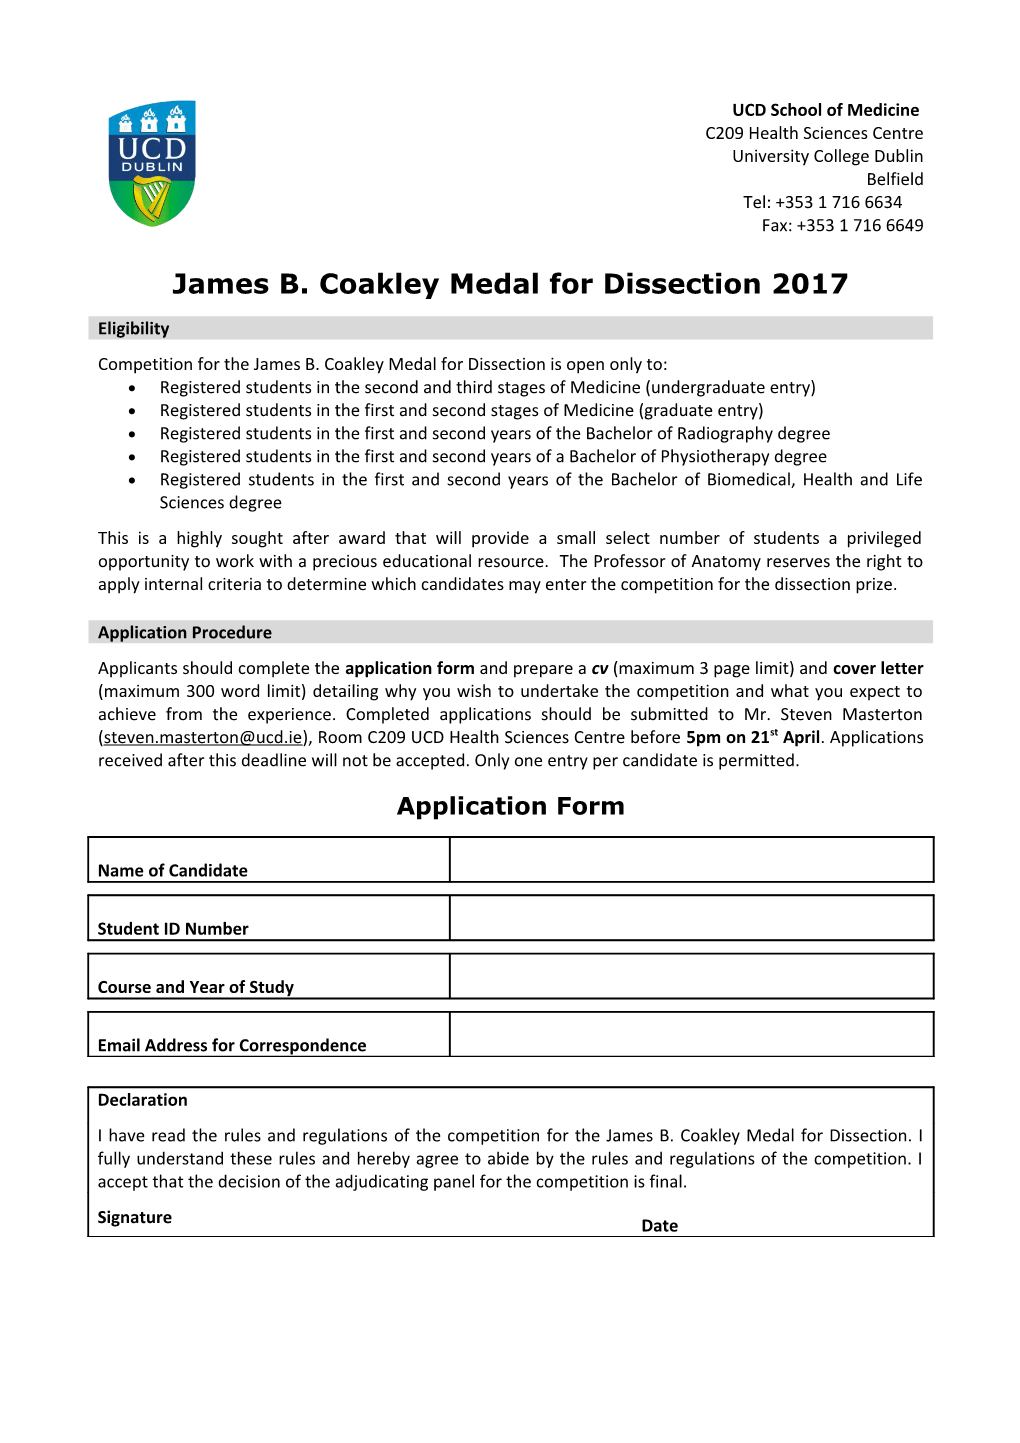 James B. Coakley Medal for Dissection 2017